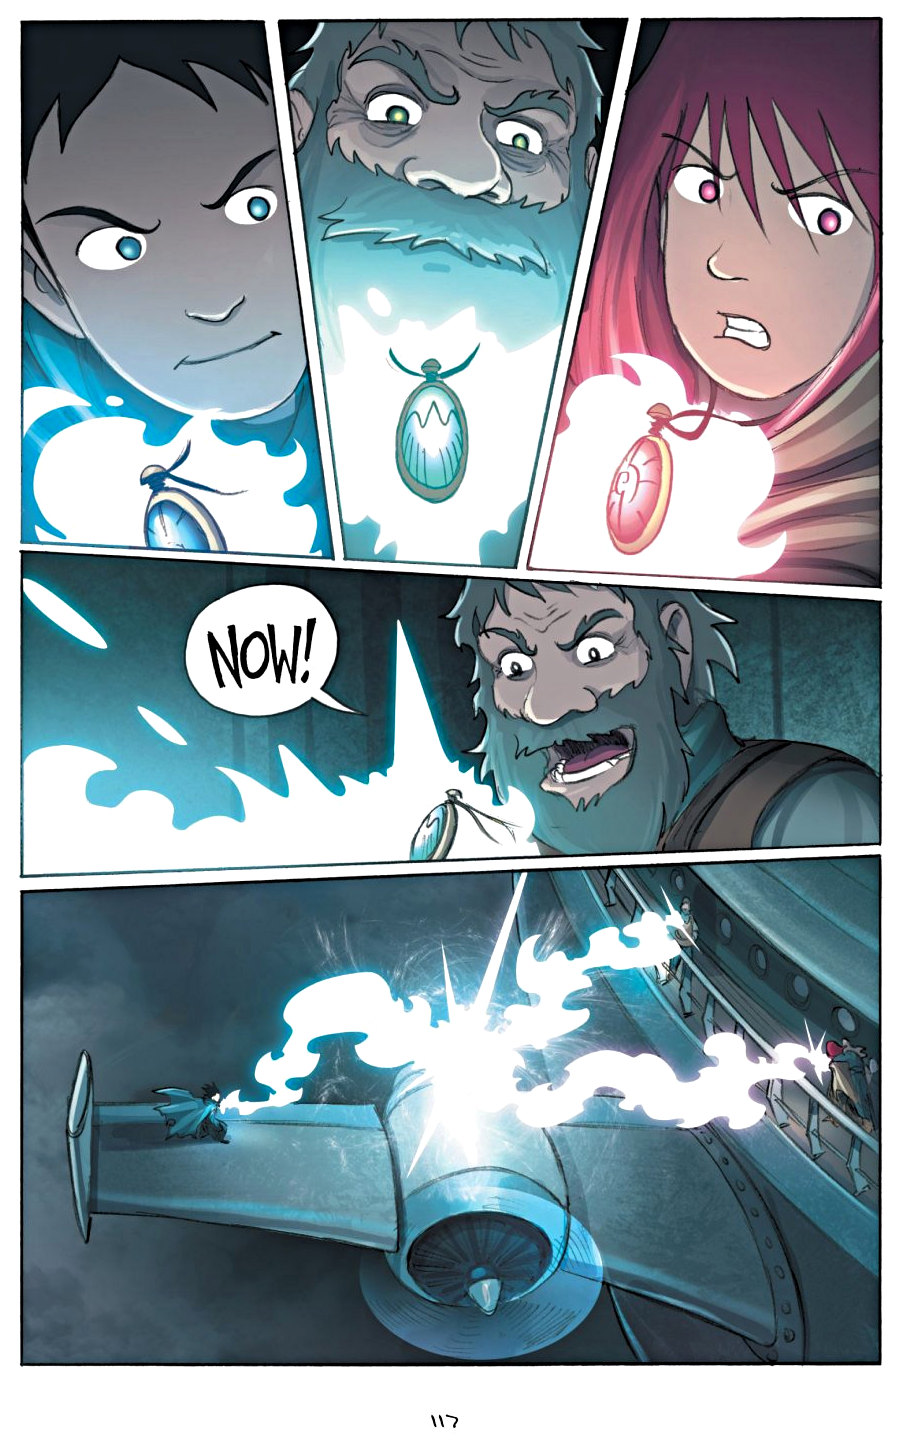 page 117 of amulet 5 prince of the elves graphic novel